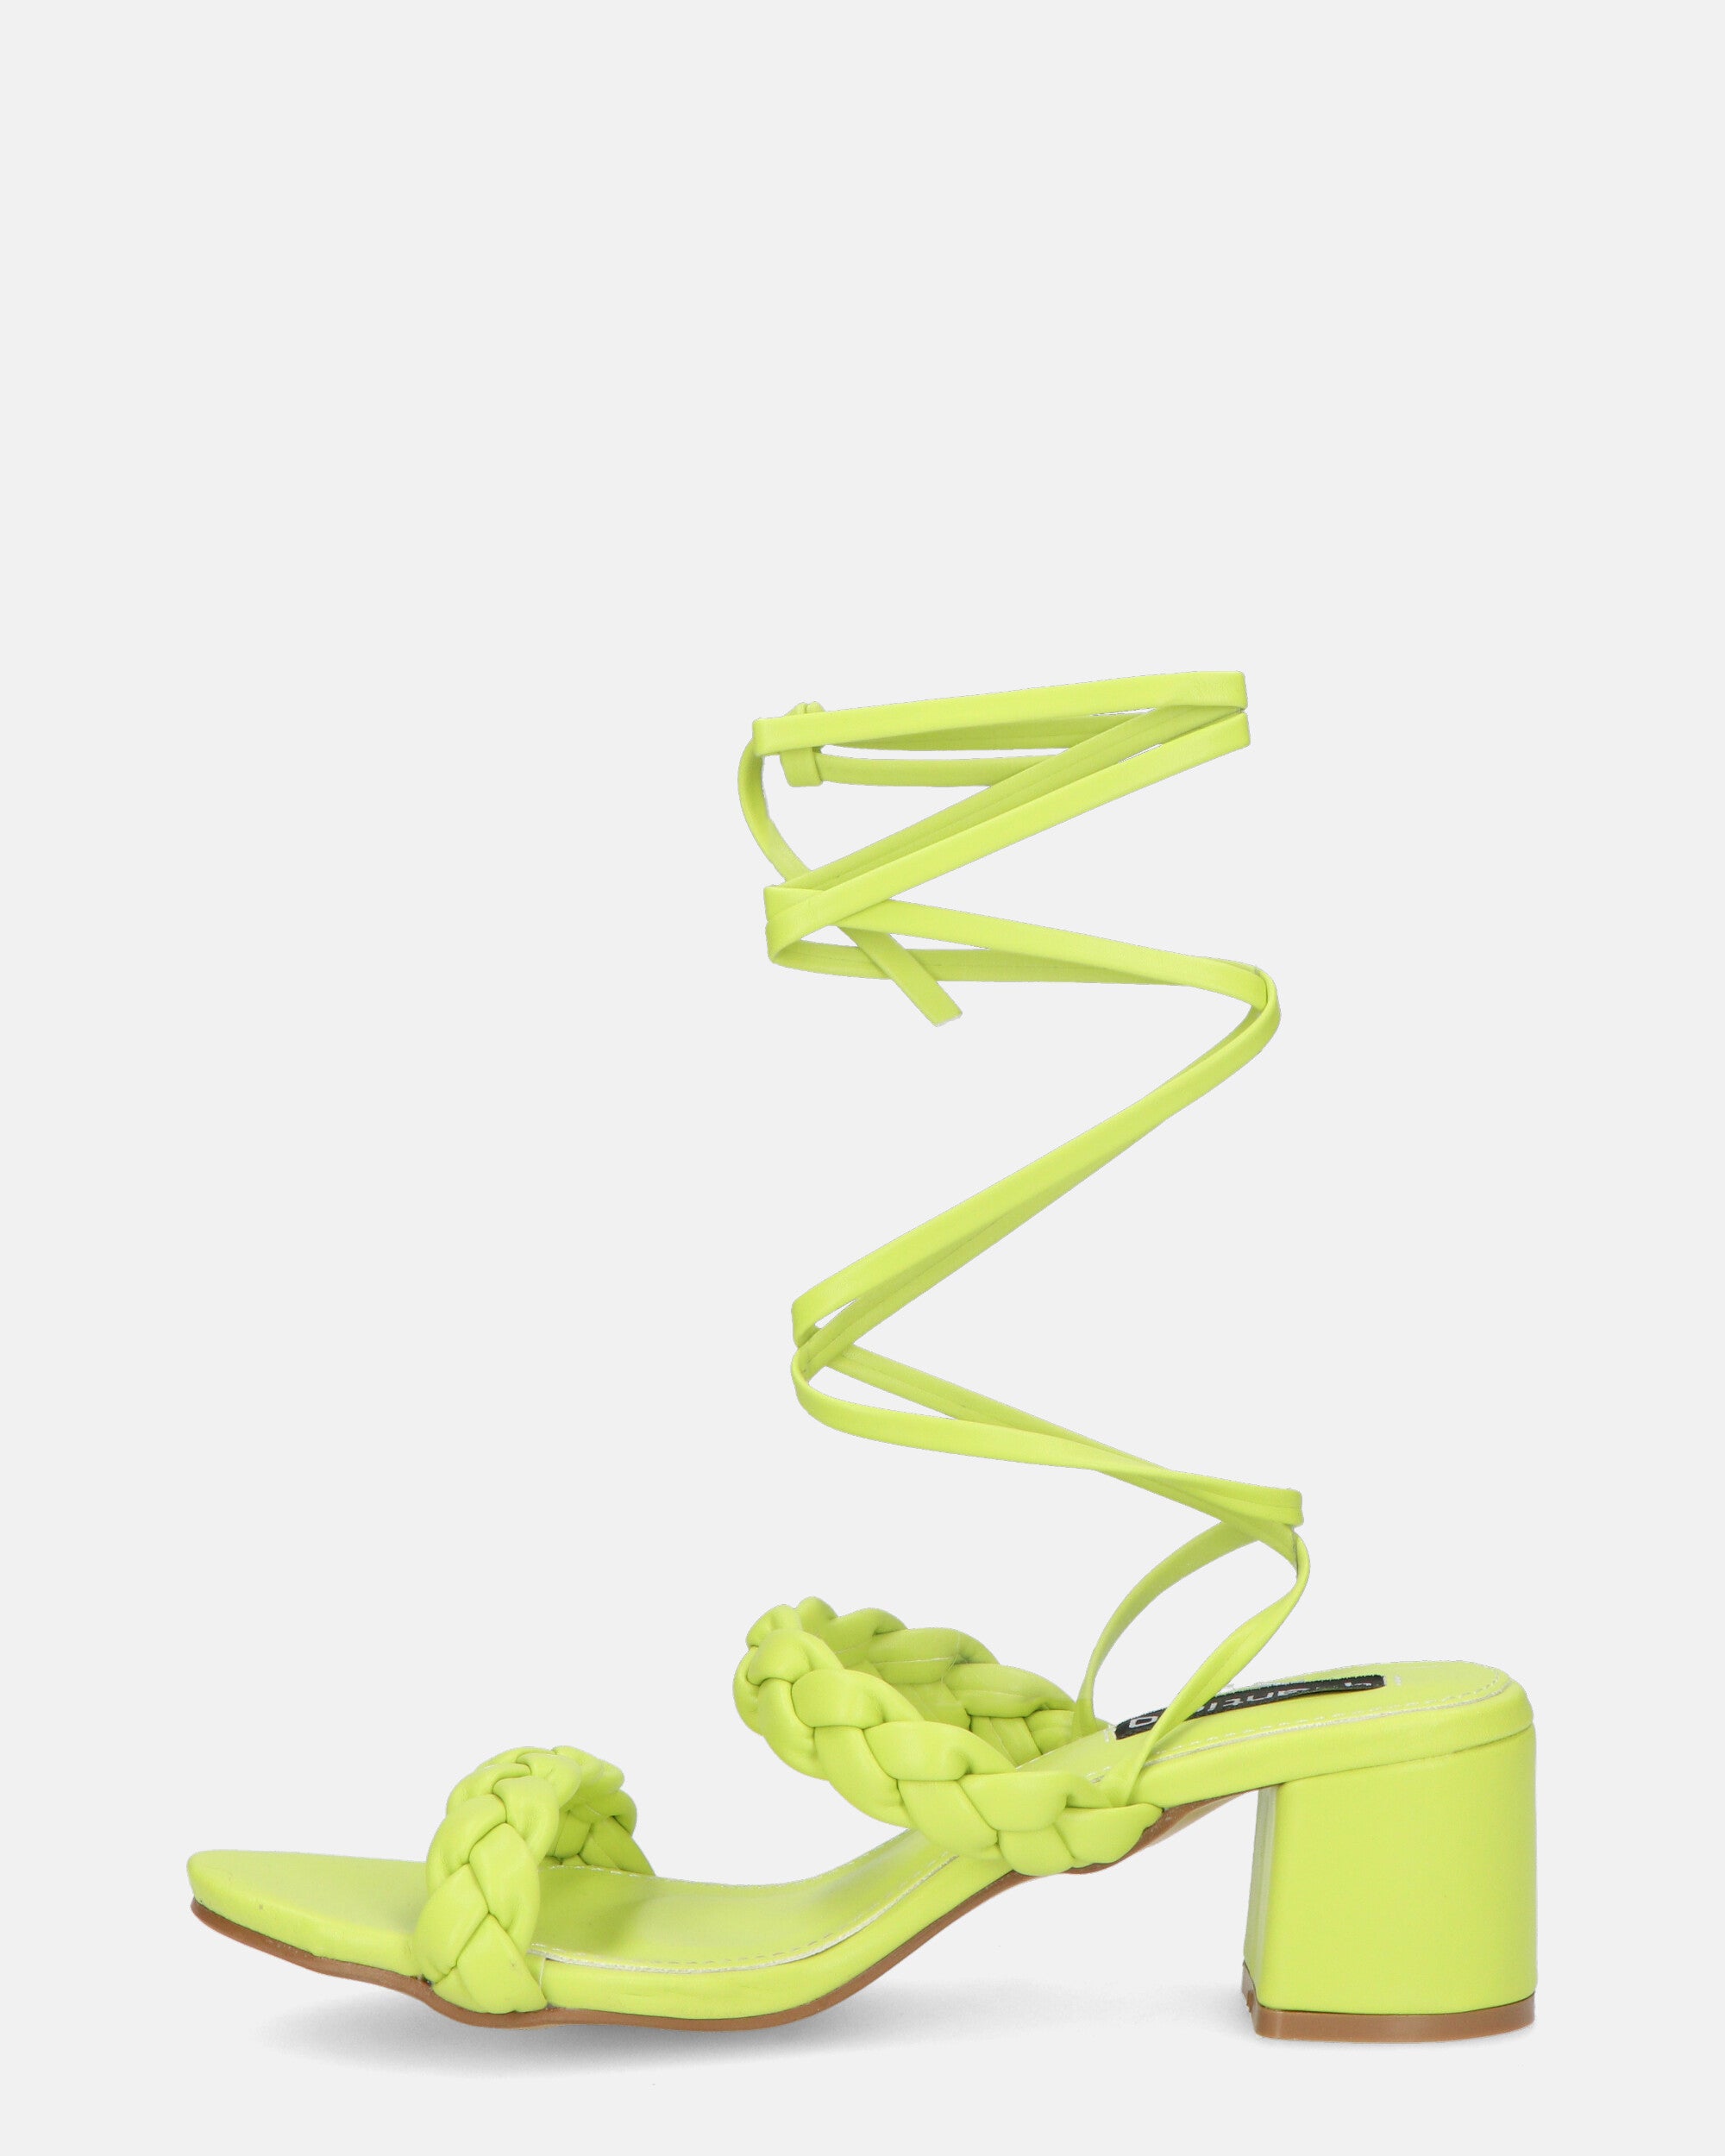 TARISAI - green faux leather sandals with laces